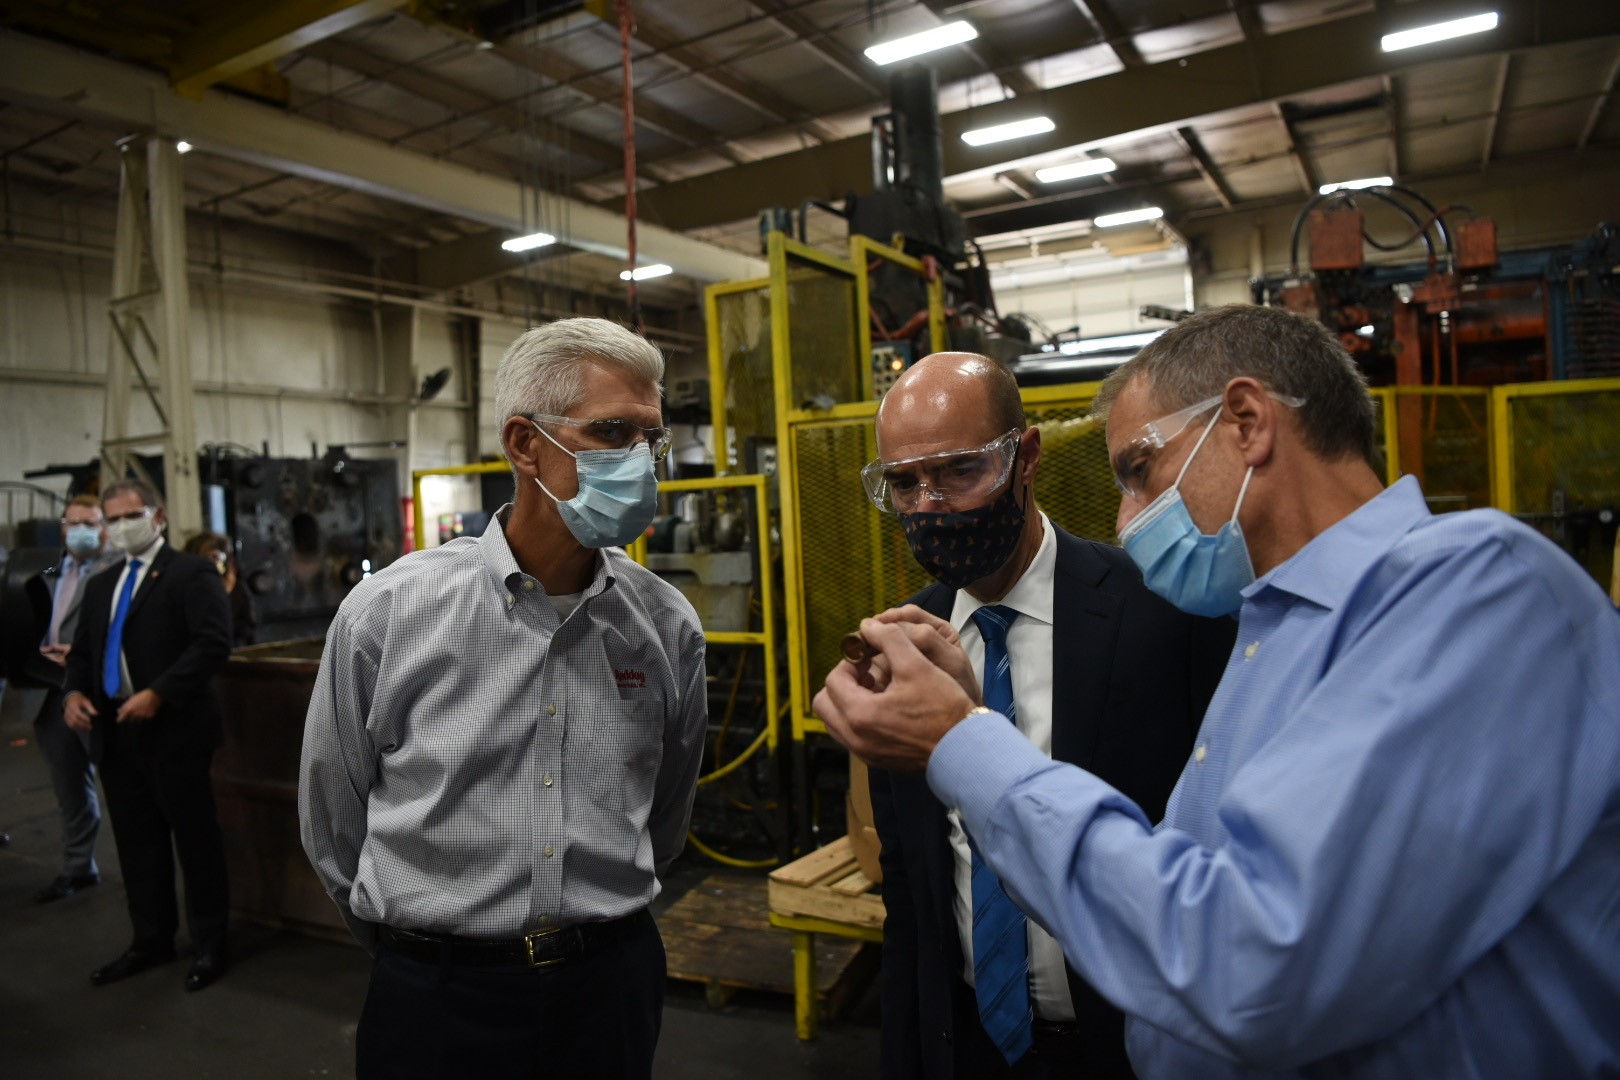 U.S. Secretary of Labor Eugene Scalia Visits PHB Inc, a Manufacturer in Fairview, Pa.